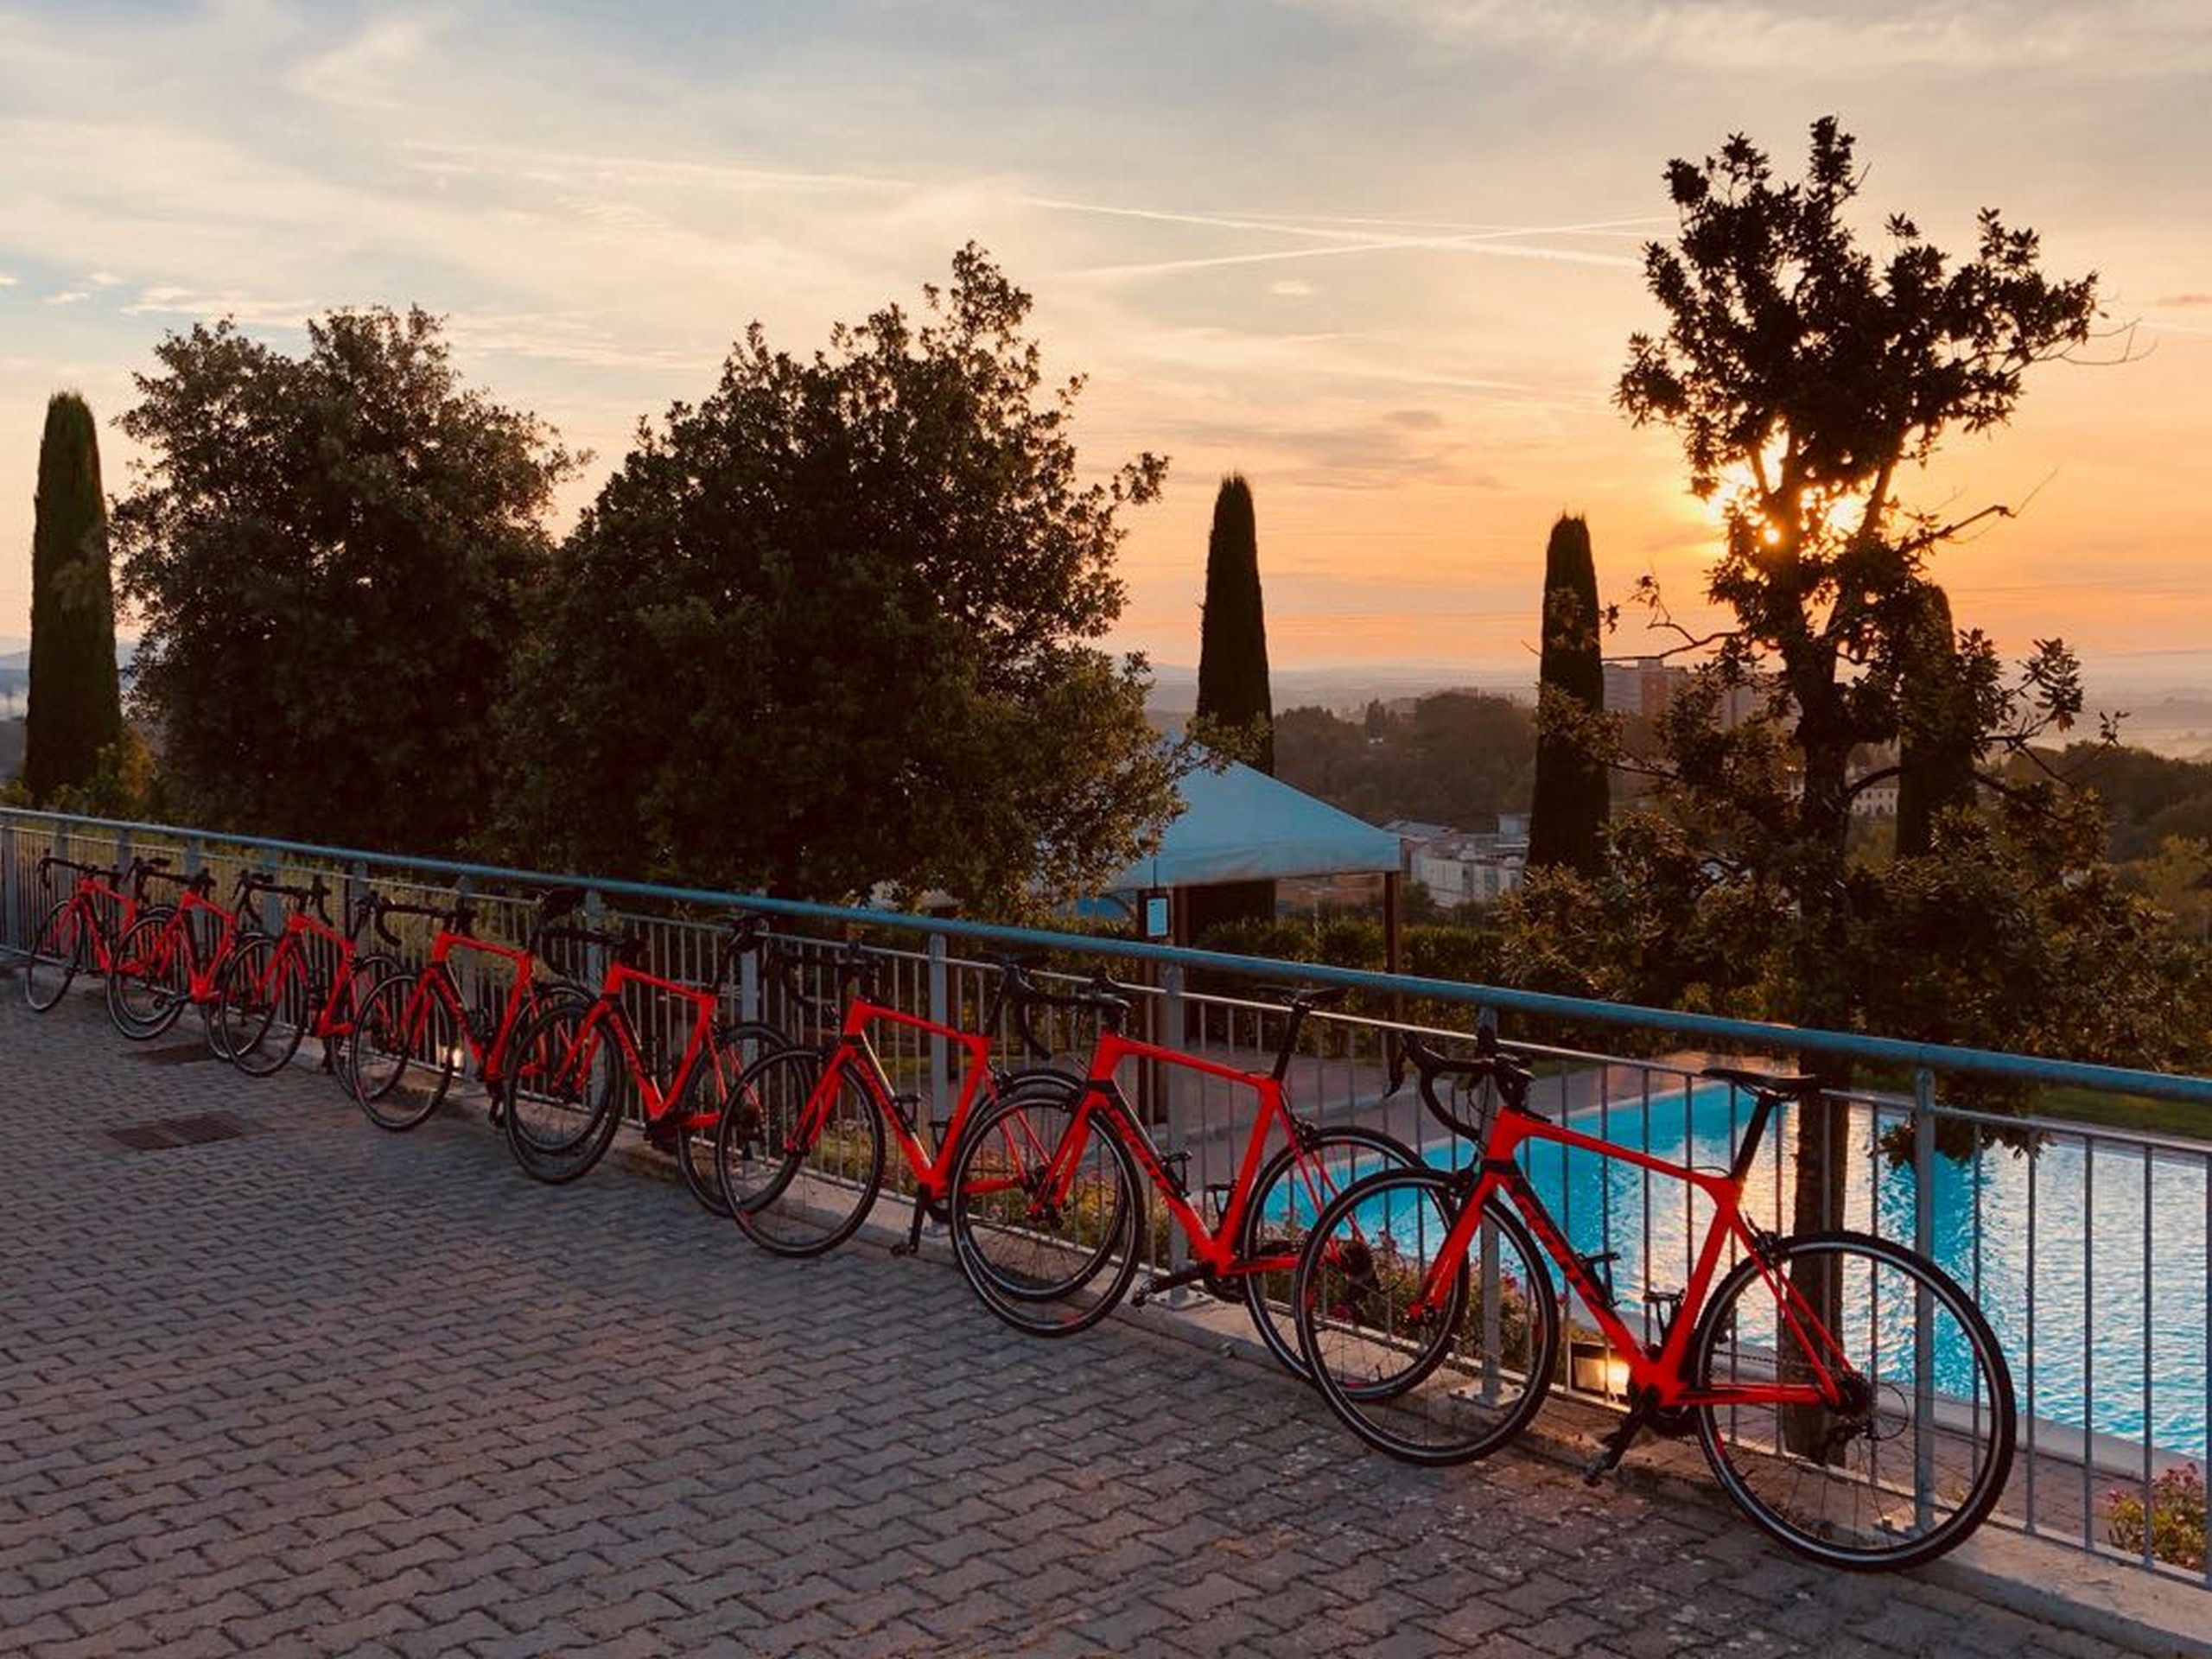 Road bikes lined up along the swimming pool in Italy